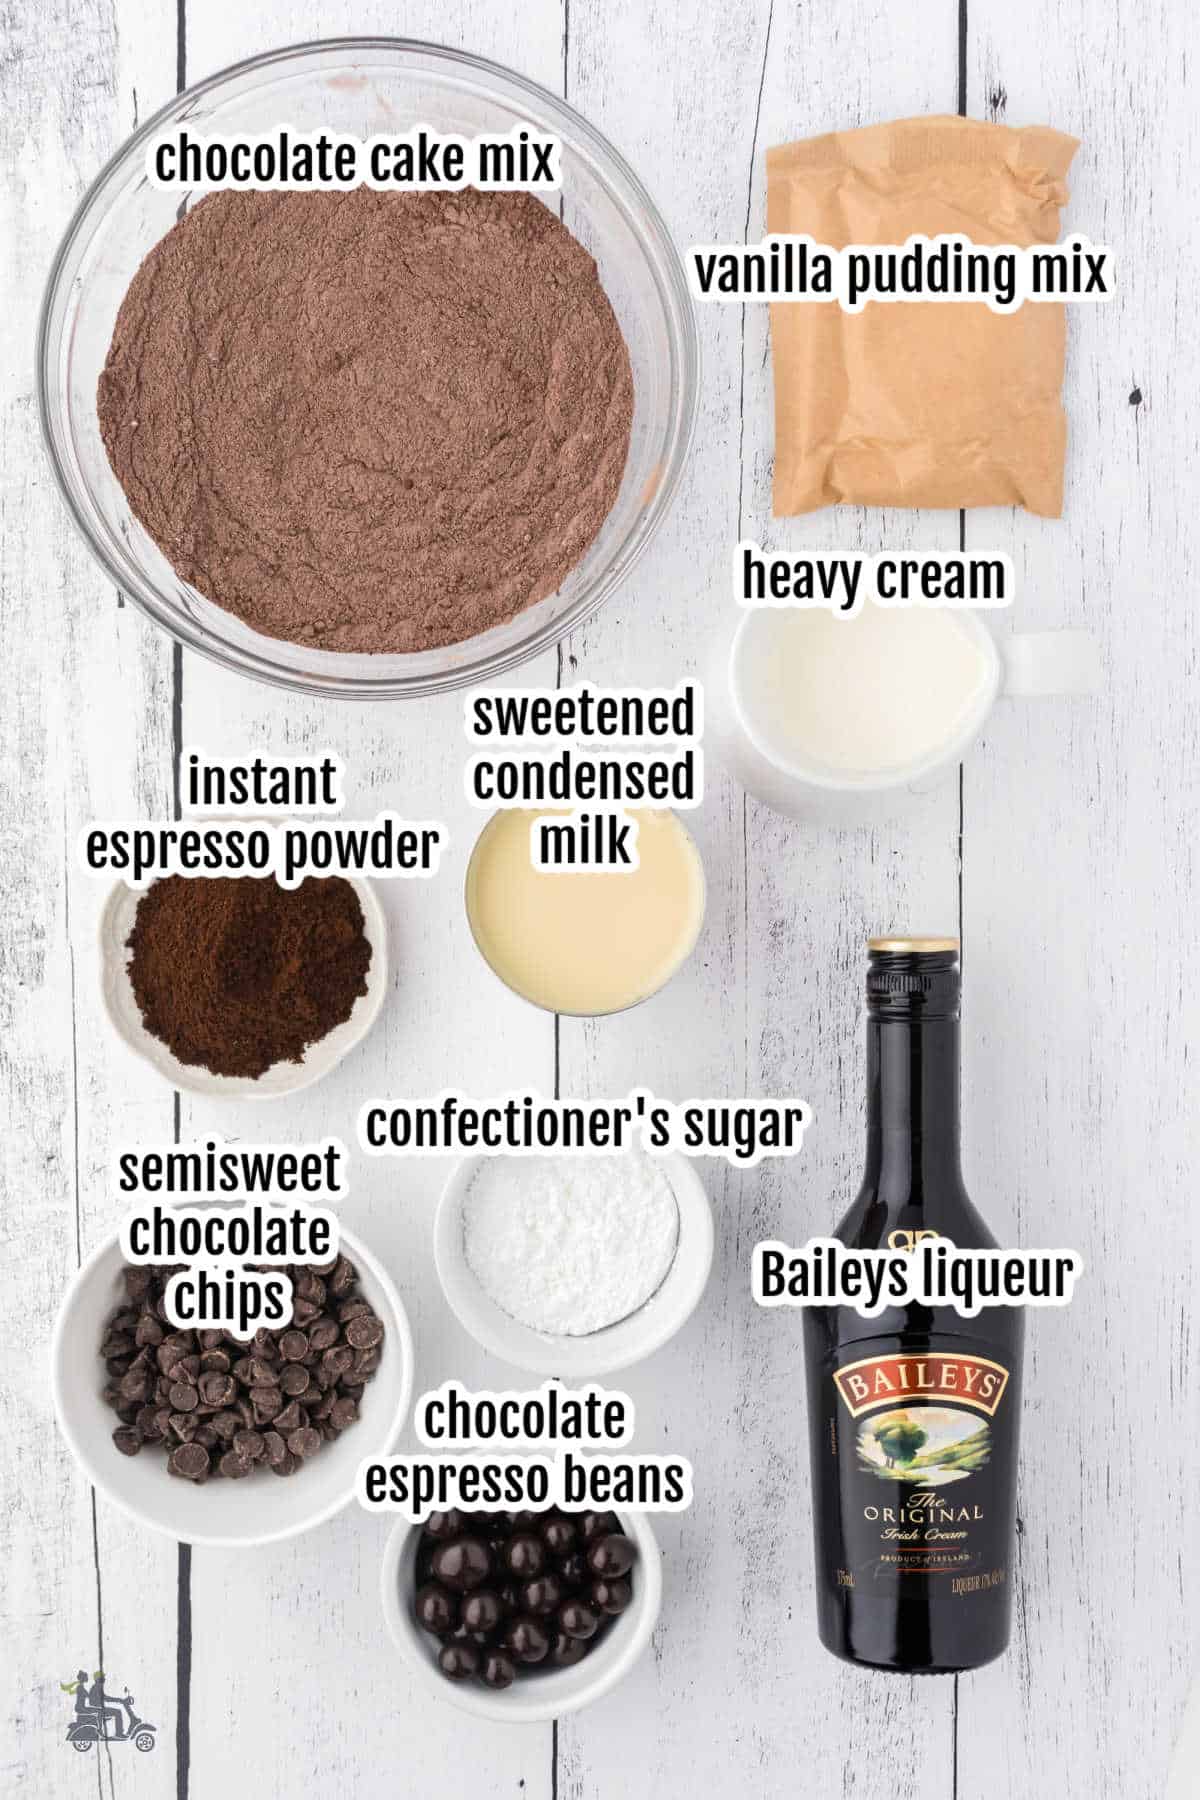 Image of the ingredients needed to make the chocolate poke cake flavored with espresso and Baileys Irish Cream. 